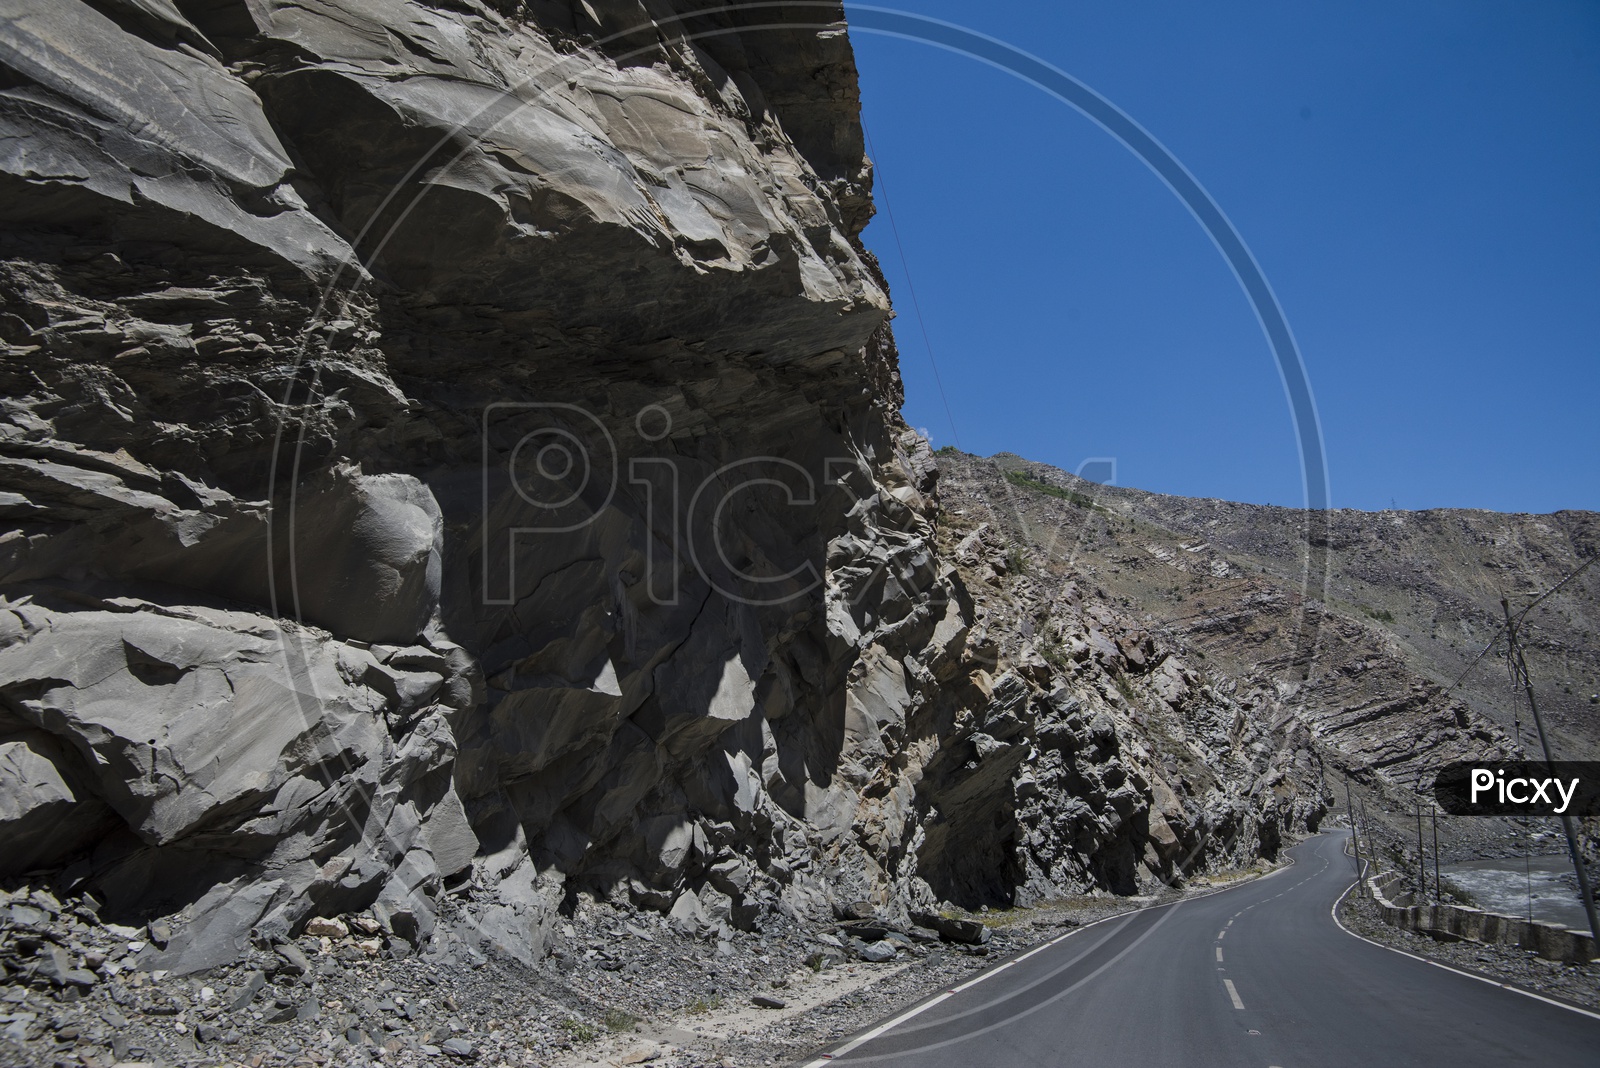 Stone Craved roads in Leh / Ladakh With Curves